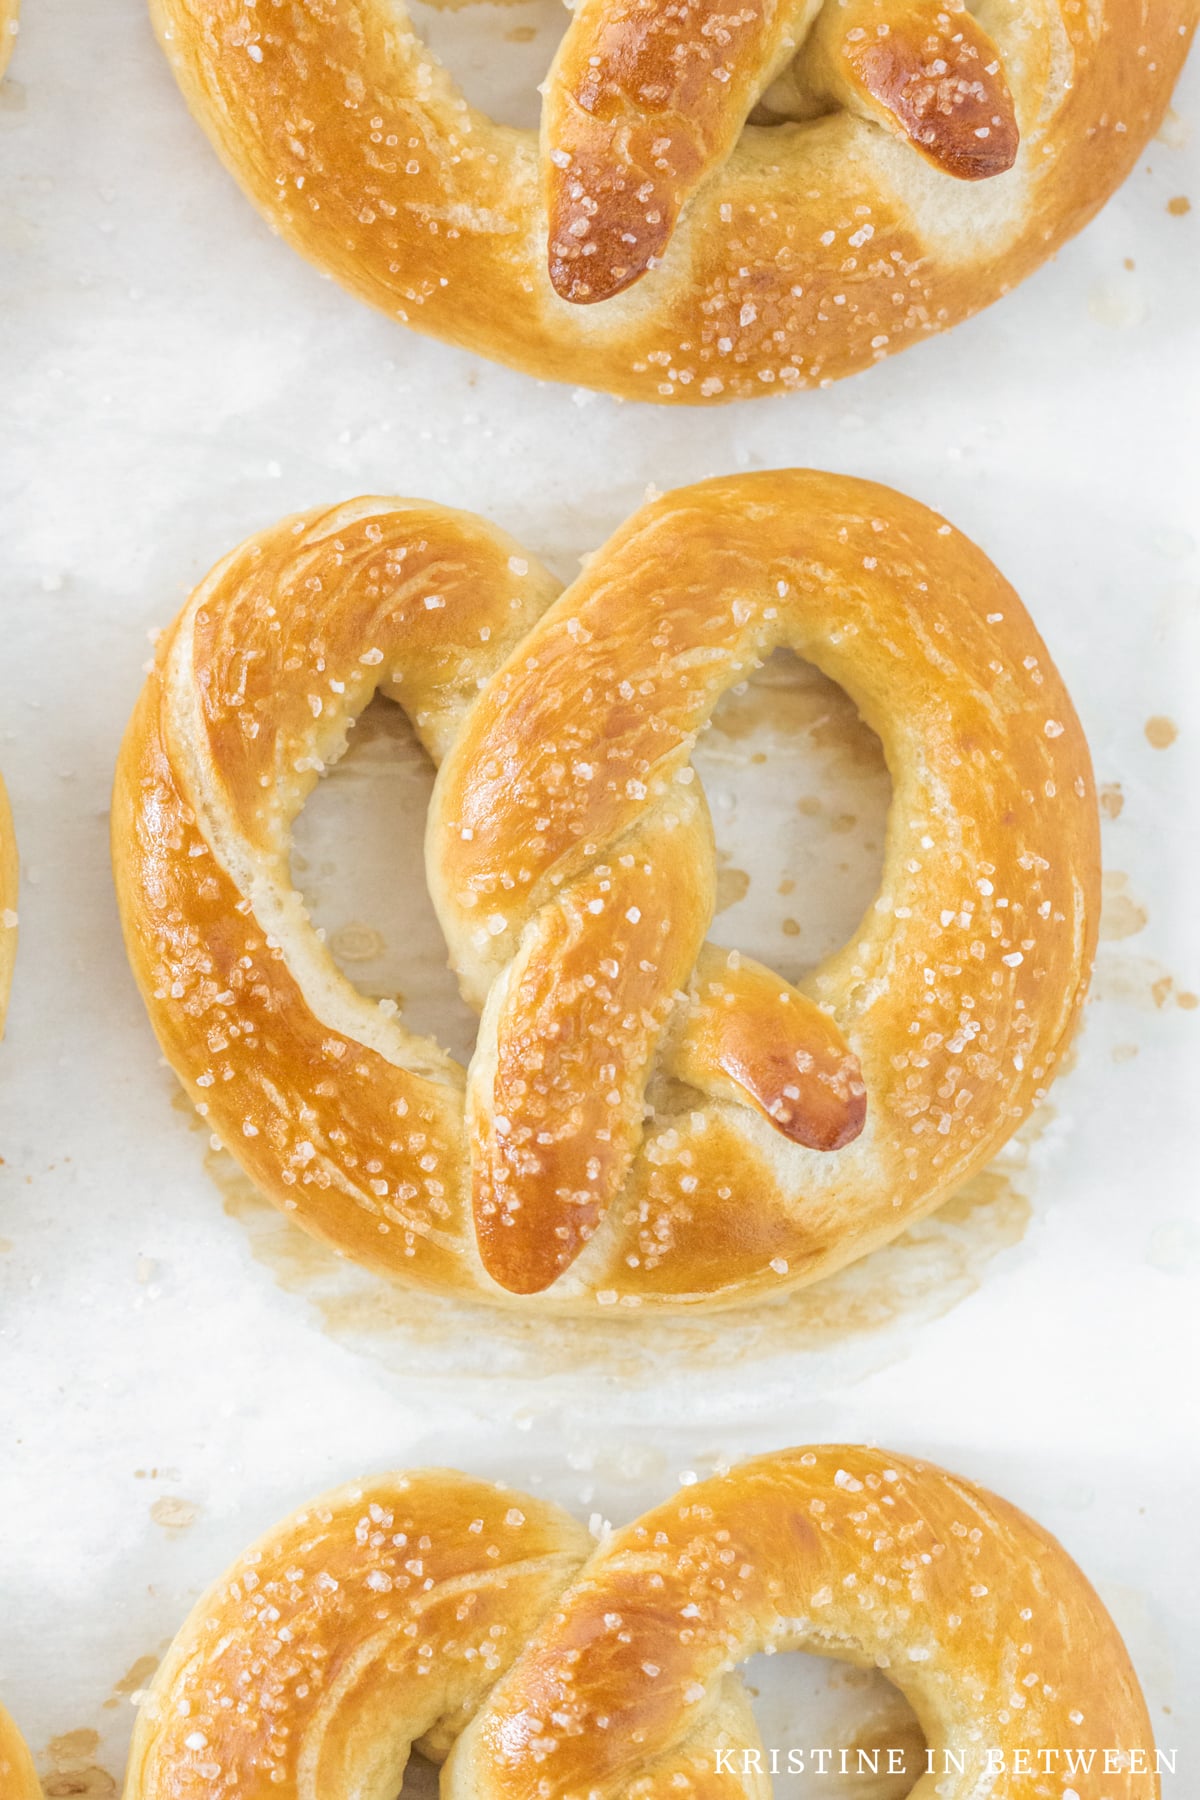 A salted pretzel sitting on  the baking pan with two other pretzels.